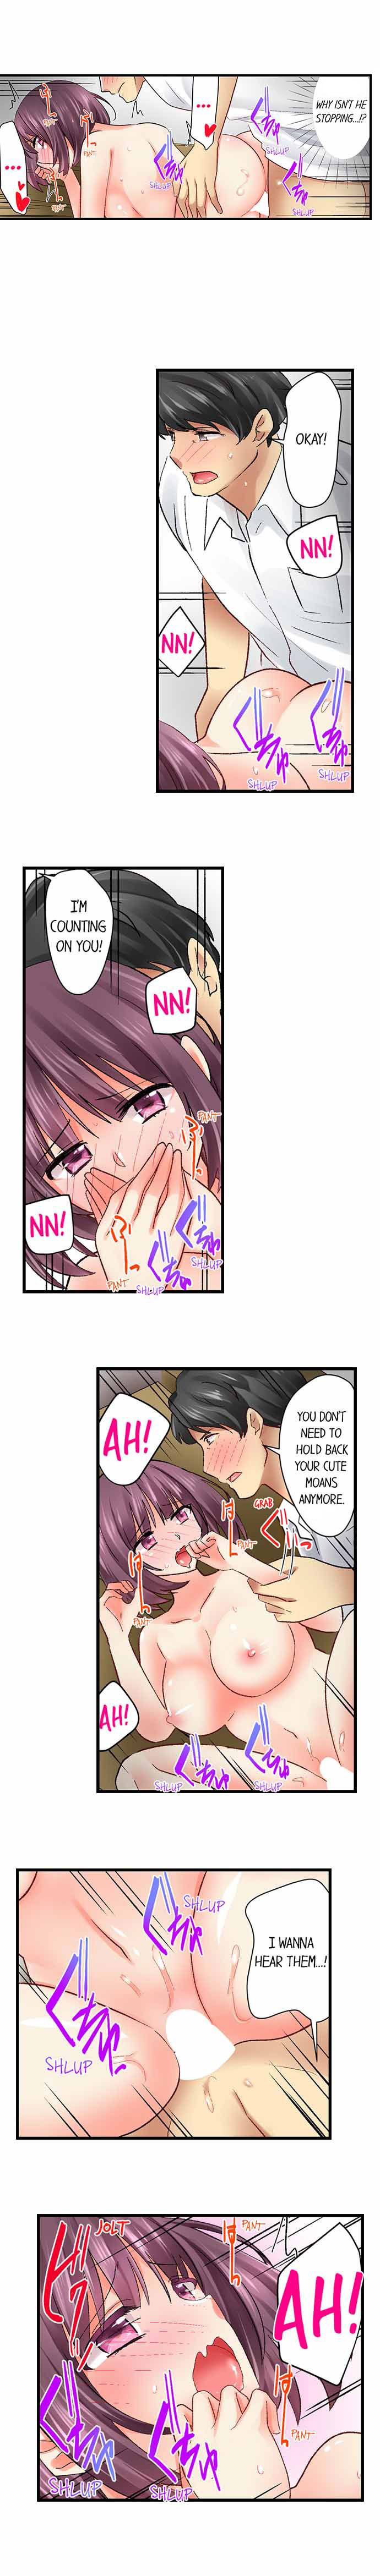 Our Kinky Newlywed Life - Chapter 42 Page 4